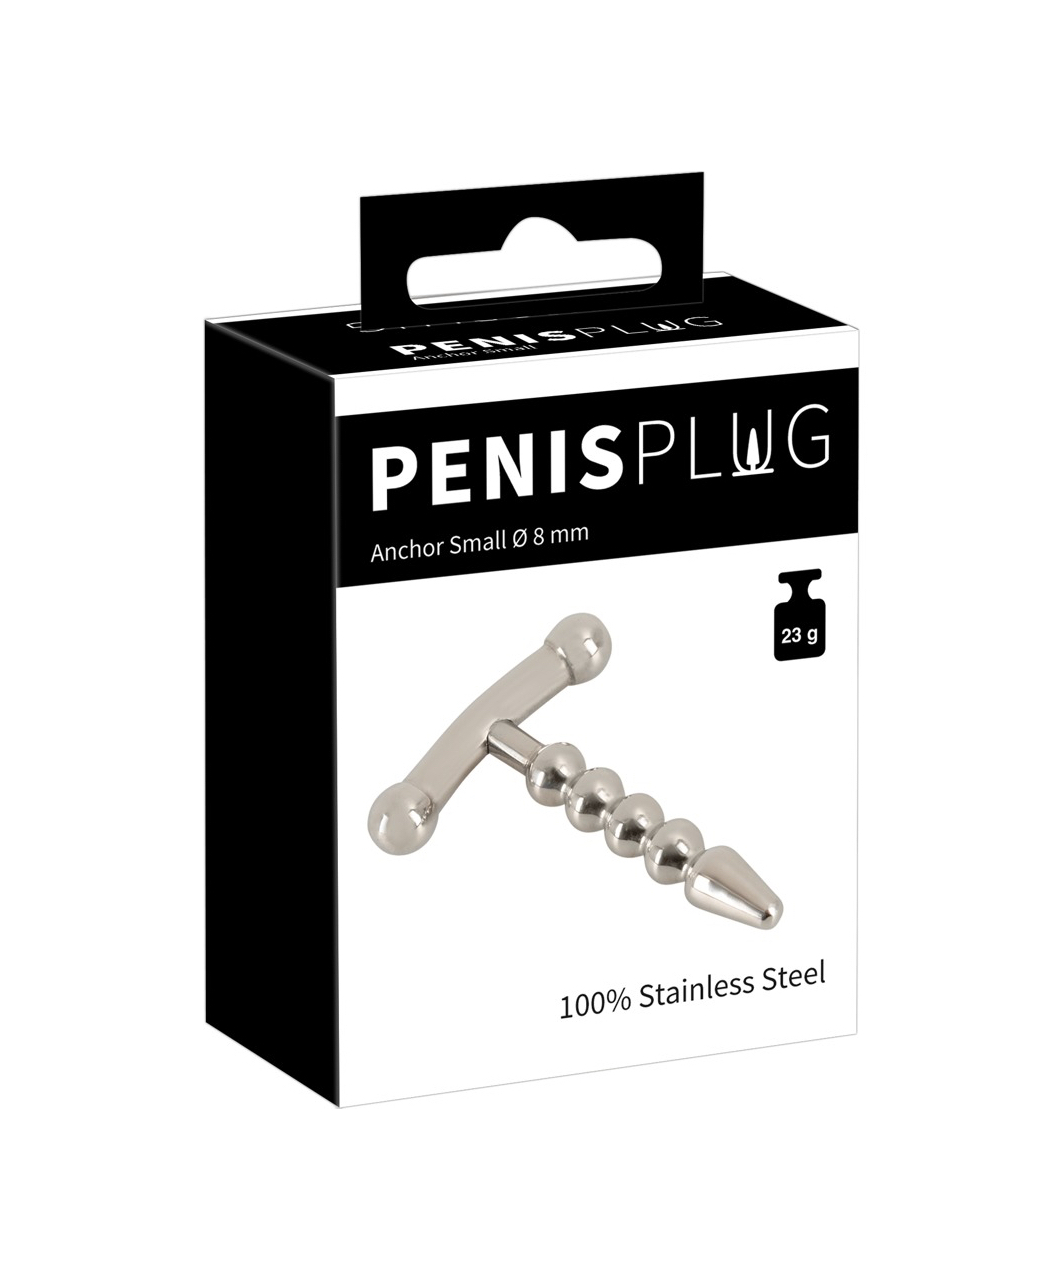 You2Toys Anchor Small Penis Plug